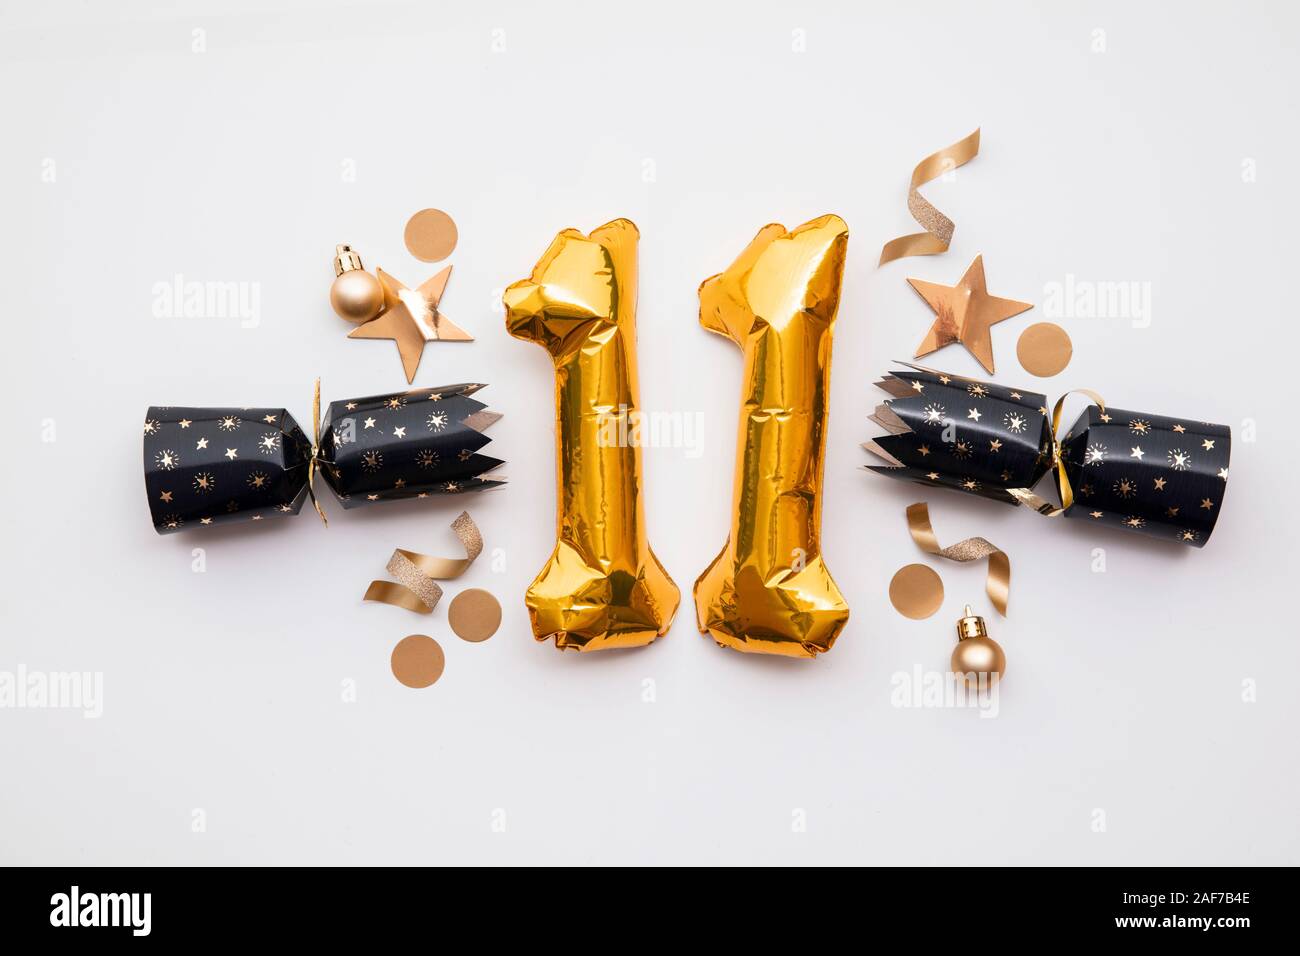 Christmas countdown. Gold number 11 with festive cristmas cracker decorations Stock Photo